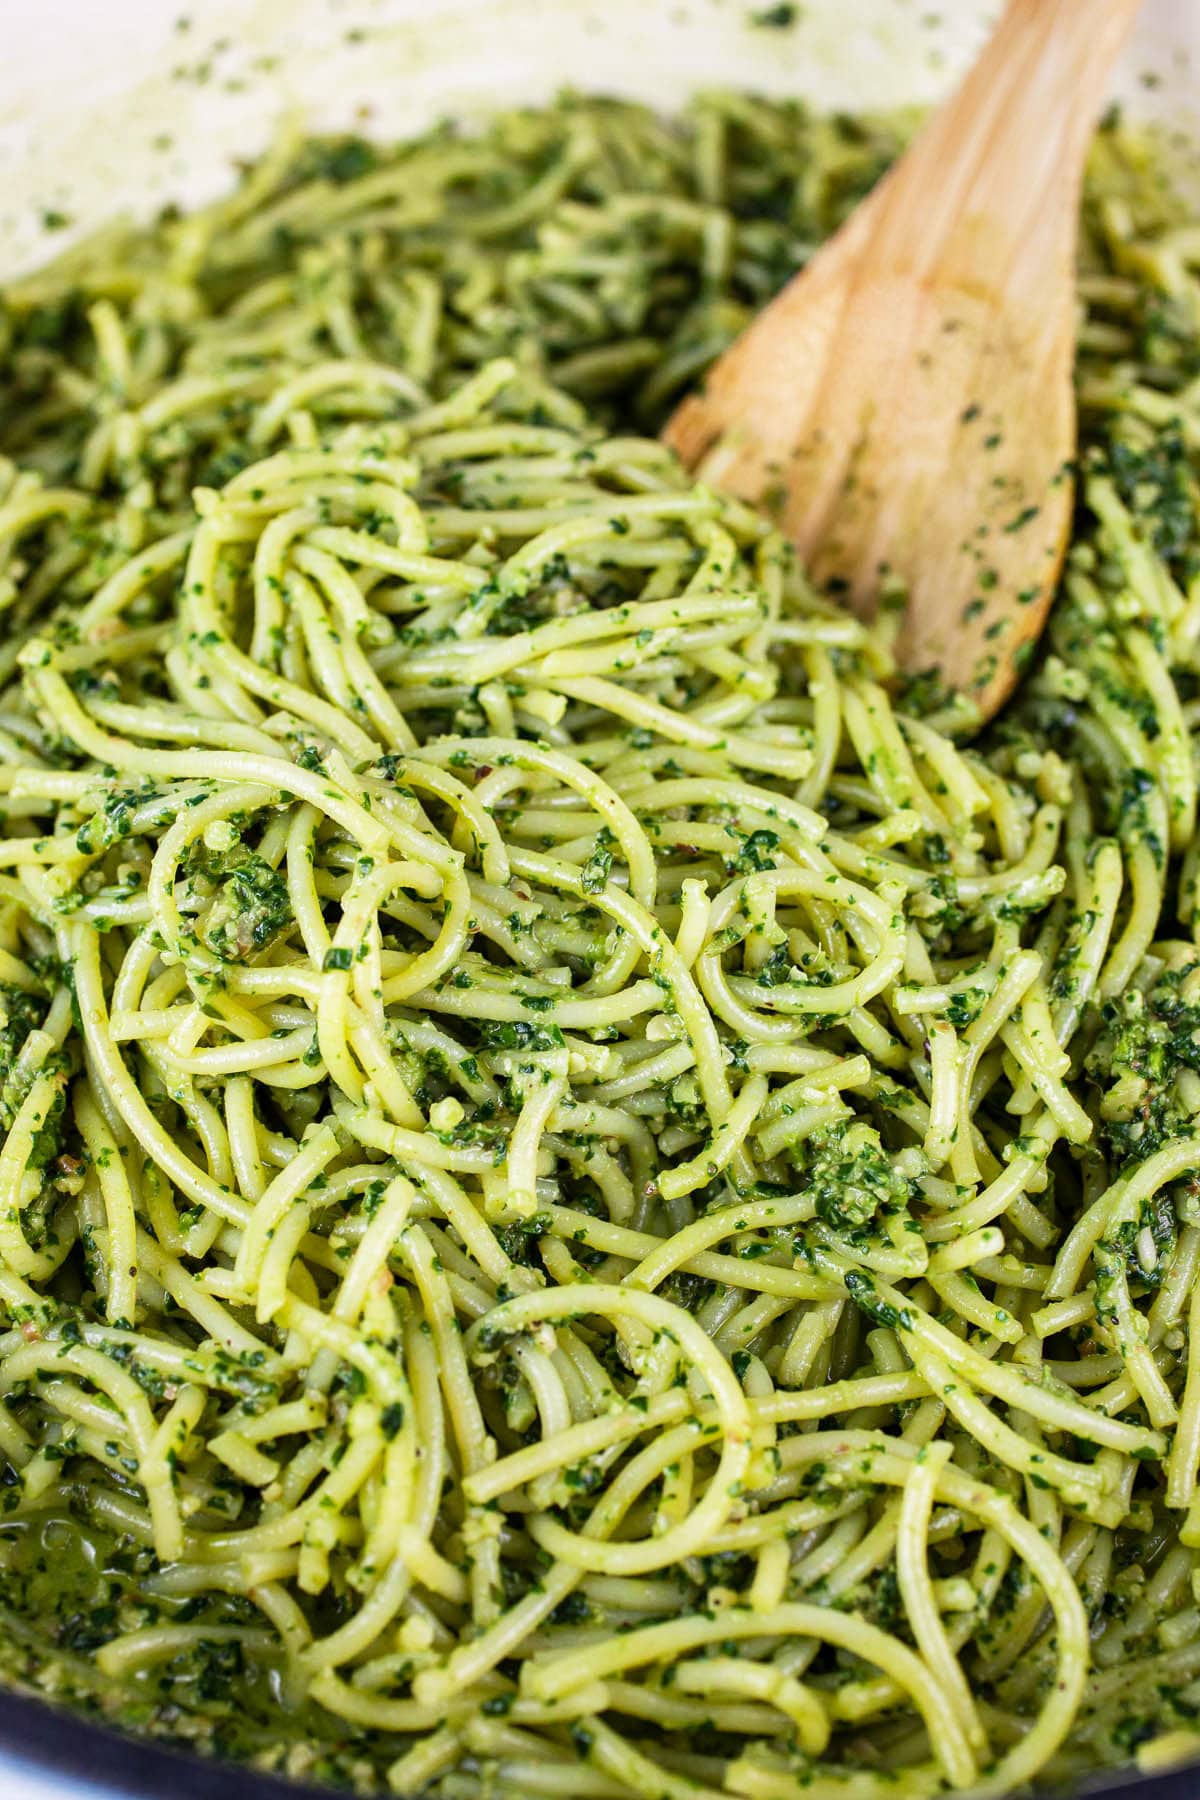 Spaghetti noodles tossed in pesto sauce with wooden spoon in skillet.